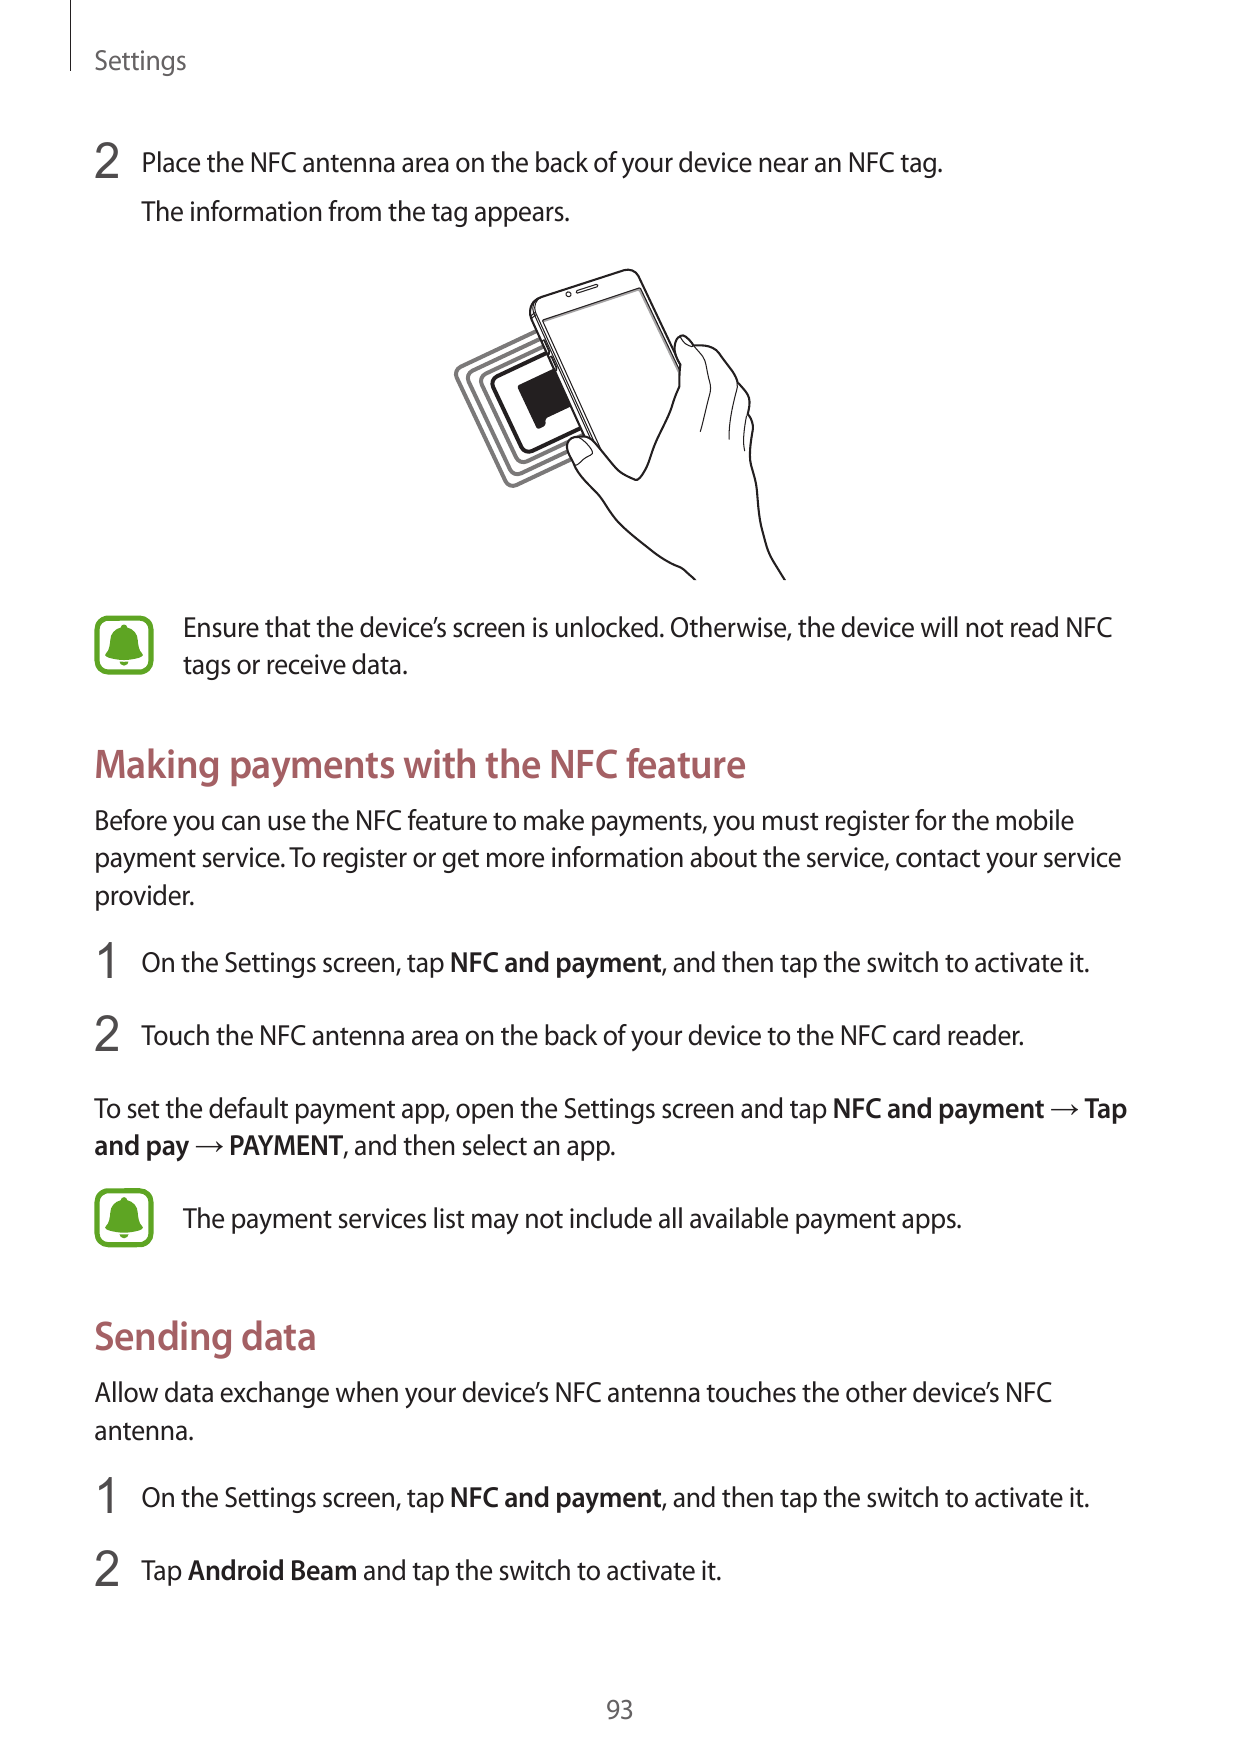 Settings2 Place the NFC antenna area on the back of your device near an NFC tag.The information from the tag appears.Ensure that